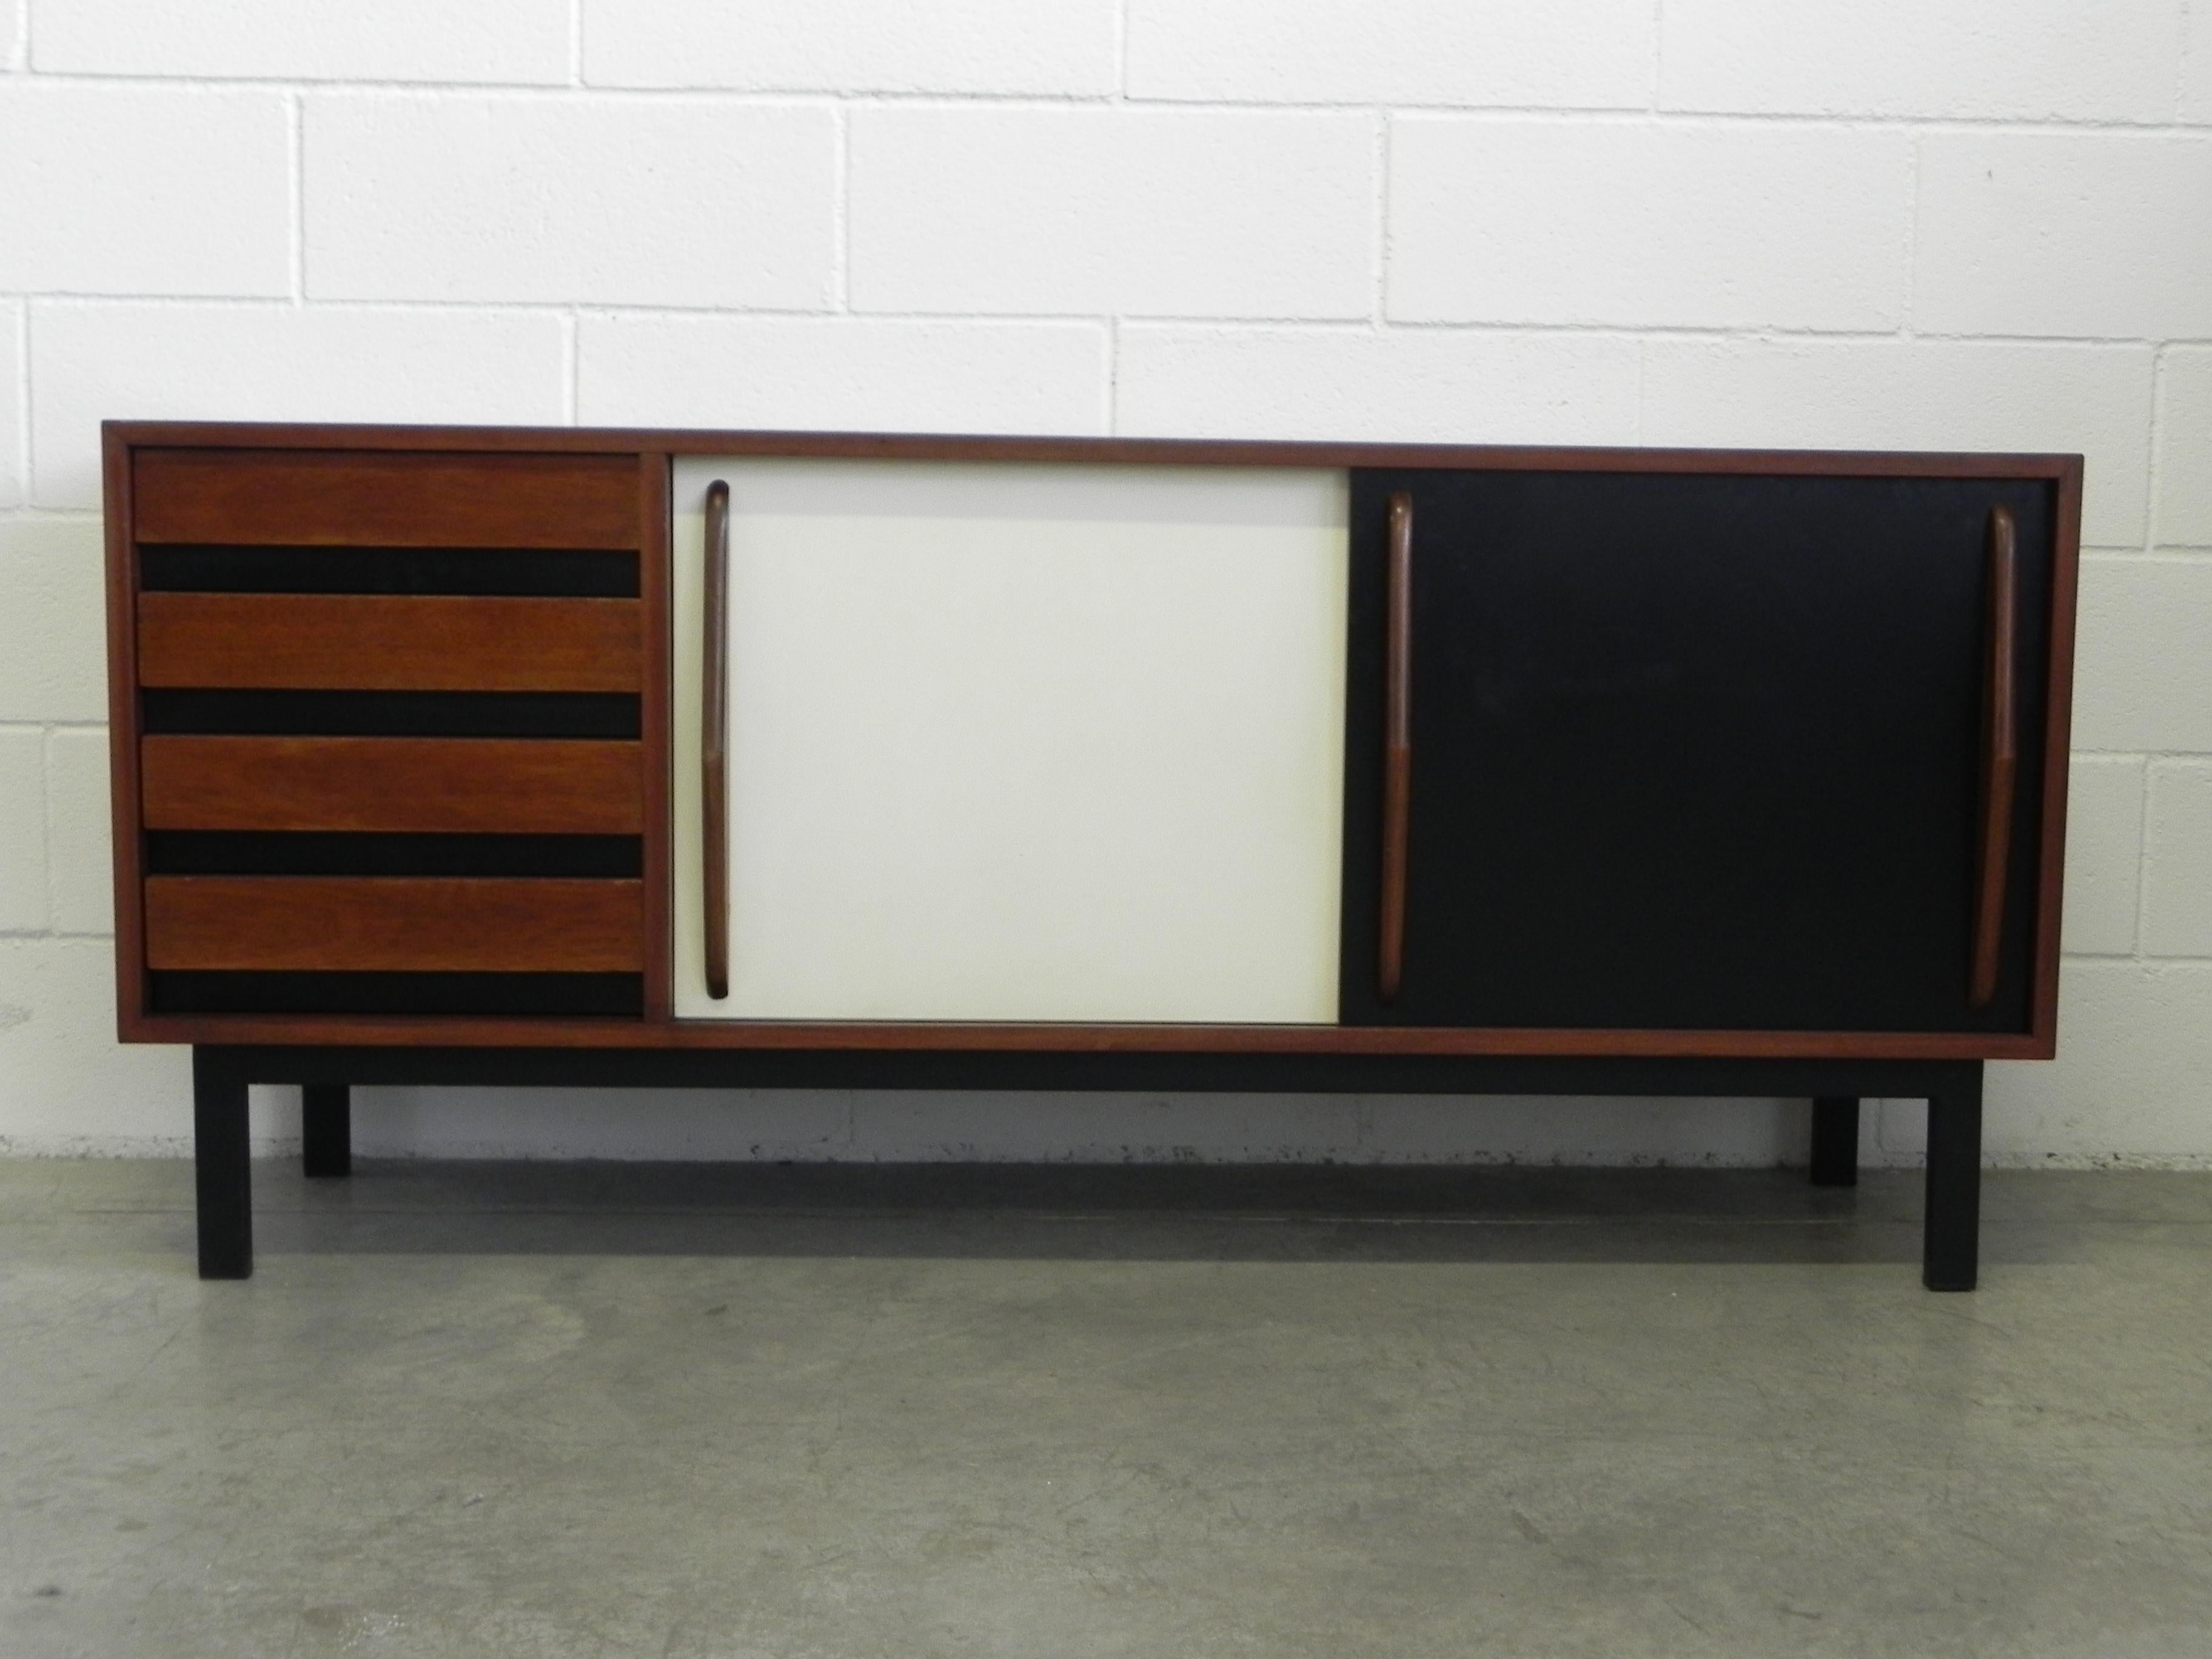 Sideboard designed by Charlotte Perriand, circa 1960. Manufactured by Steph Simon (France). Steel base, wood structure and grips, lacquered sliding doors. In good original condition, with minor wear consistent with age and use, complete restored.